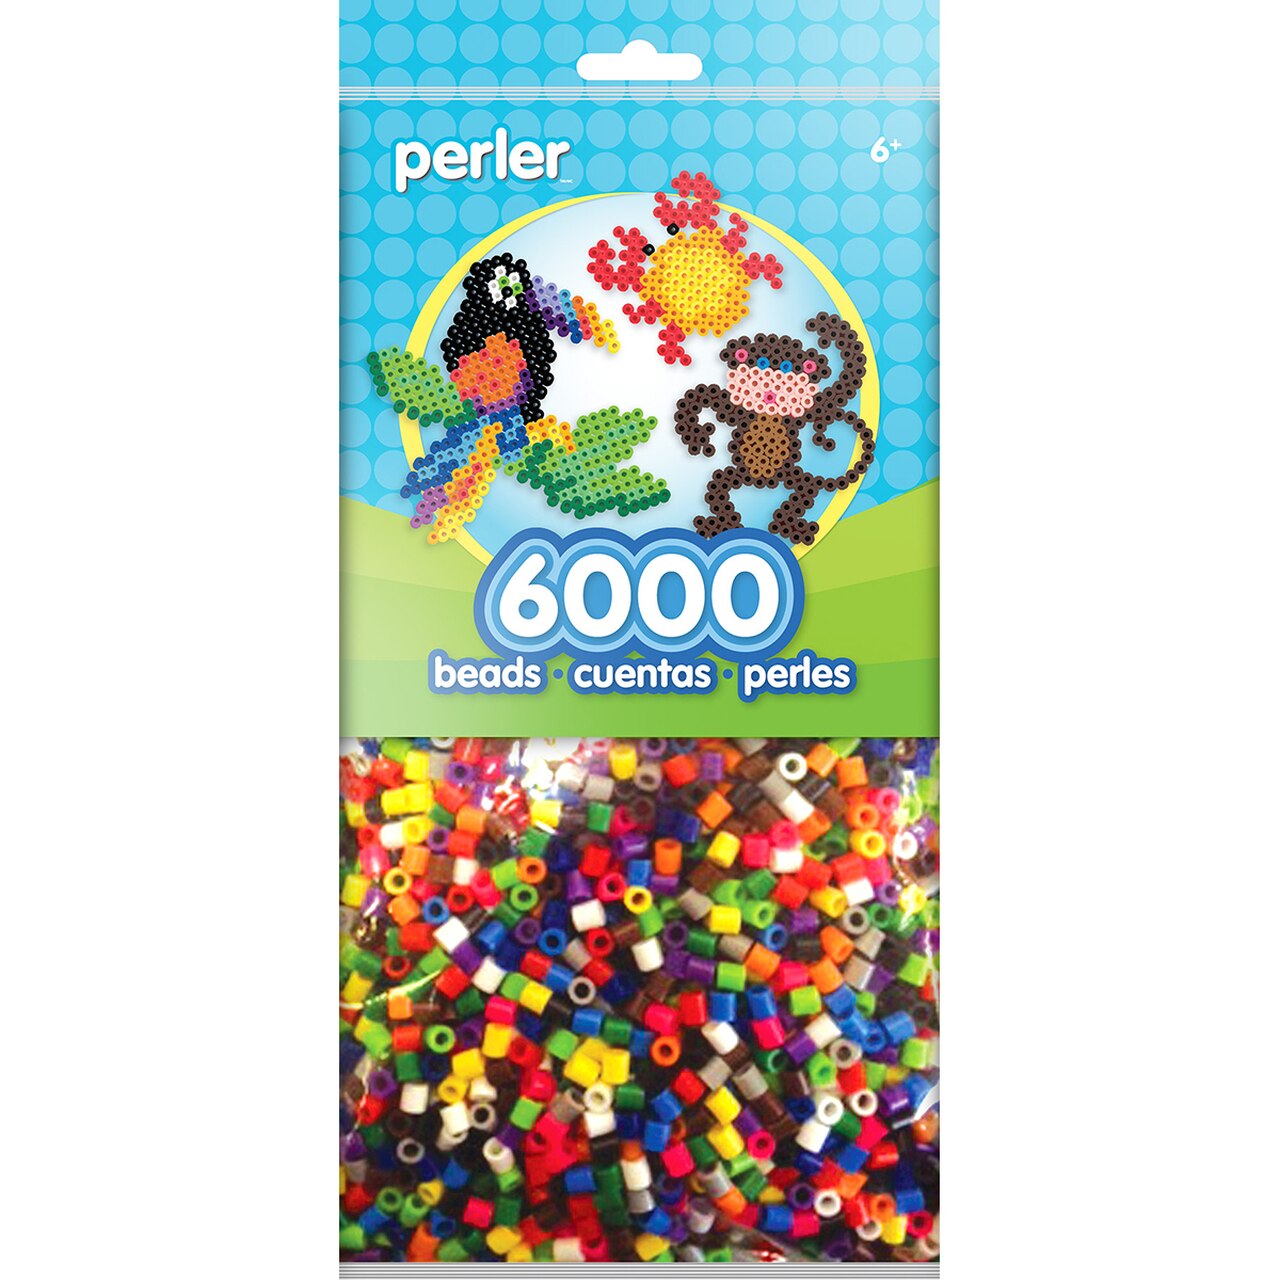 Fun Fusion Activity Bucket Multi-Mix, Perler Beads, Group Pack, 6000 Ct -  The Online Drugstore ©